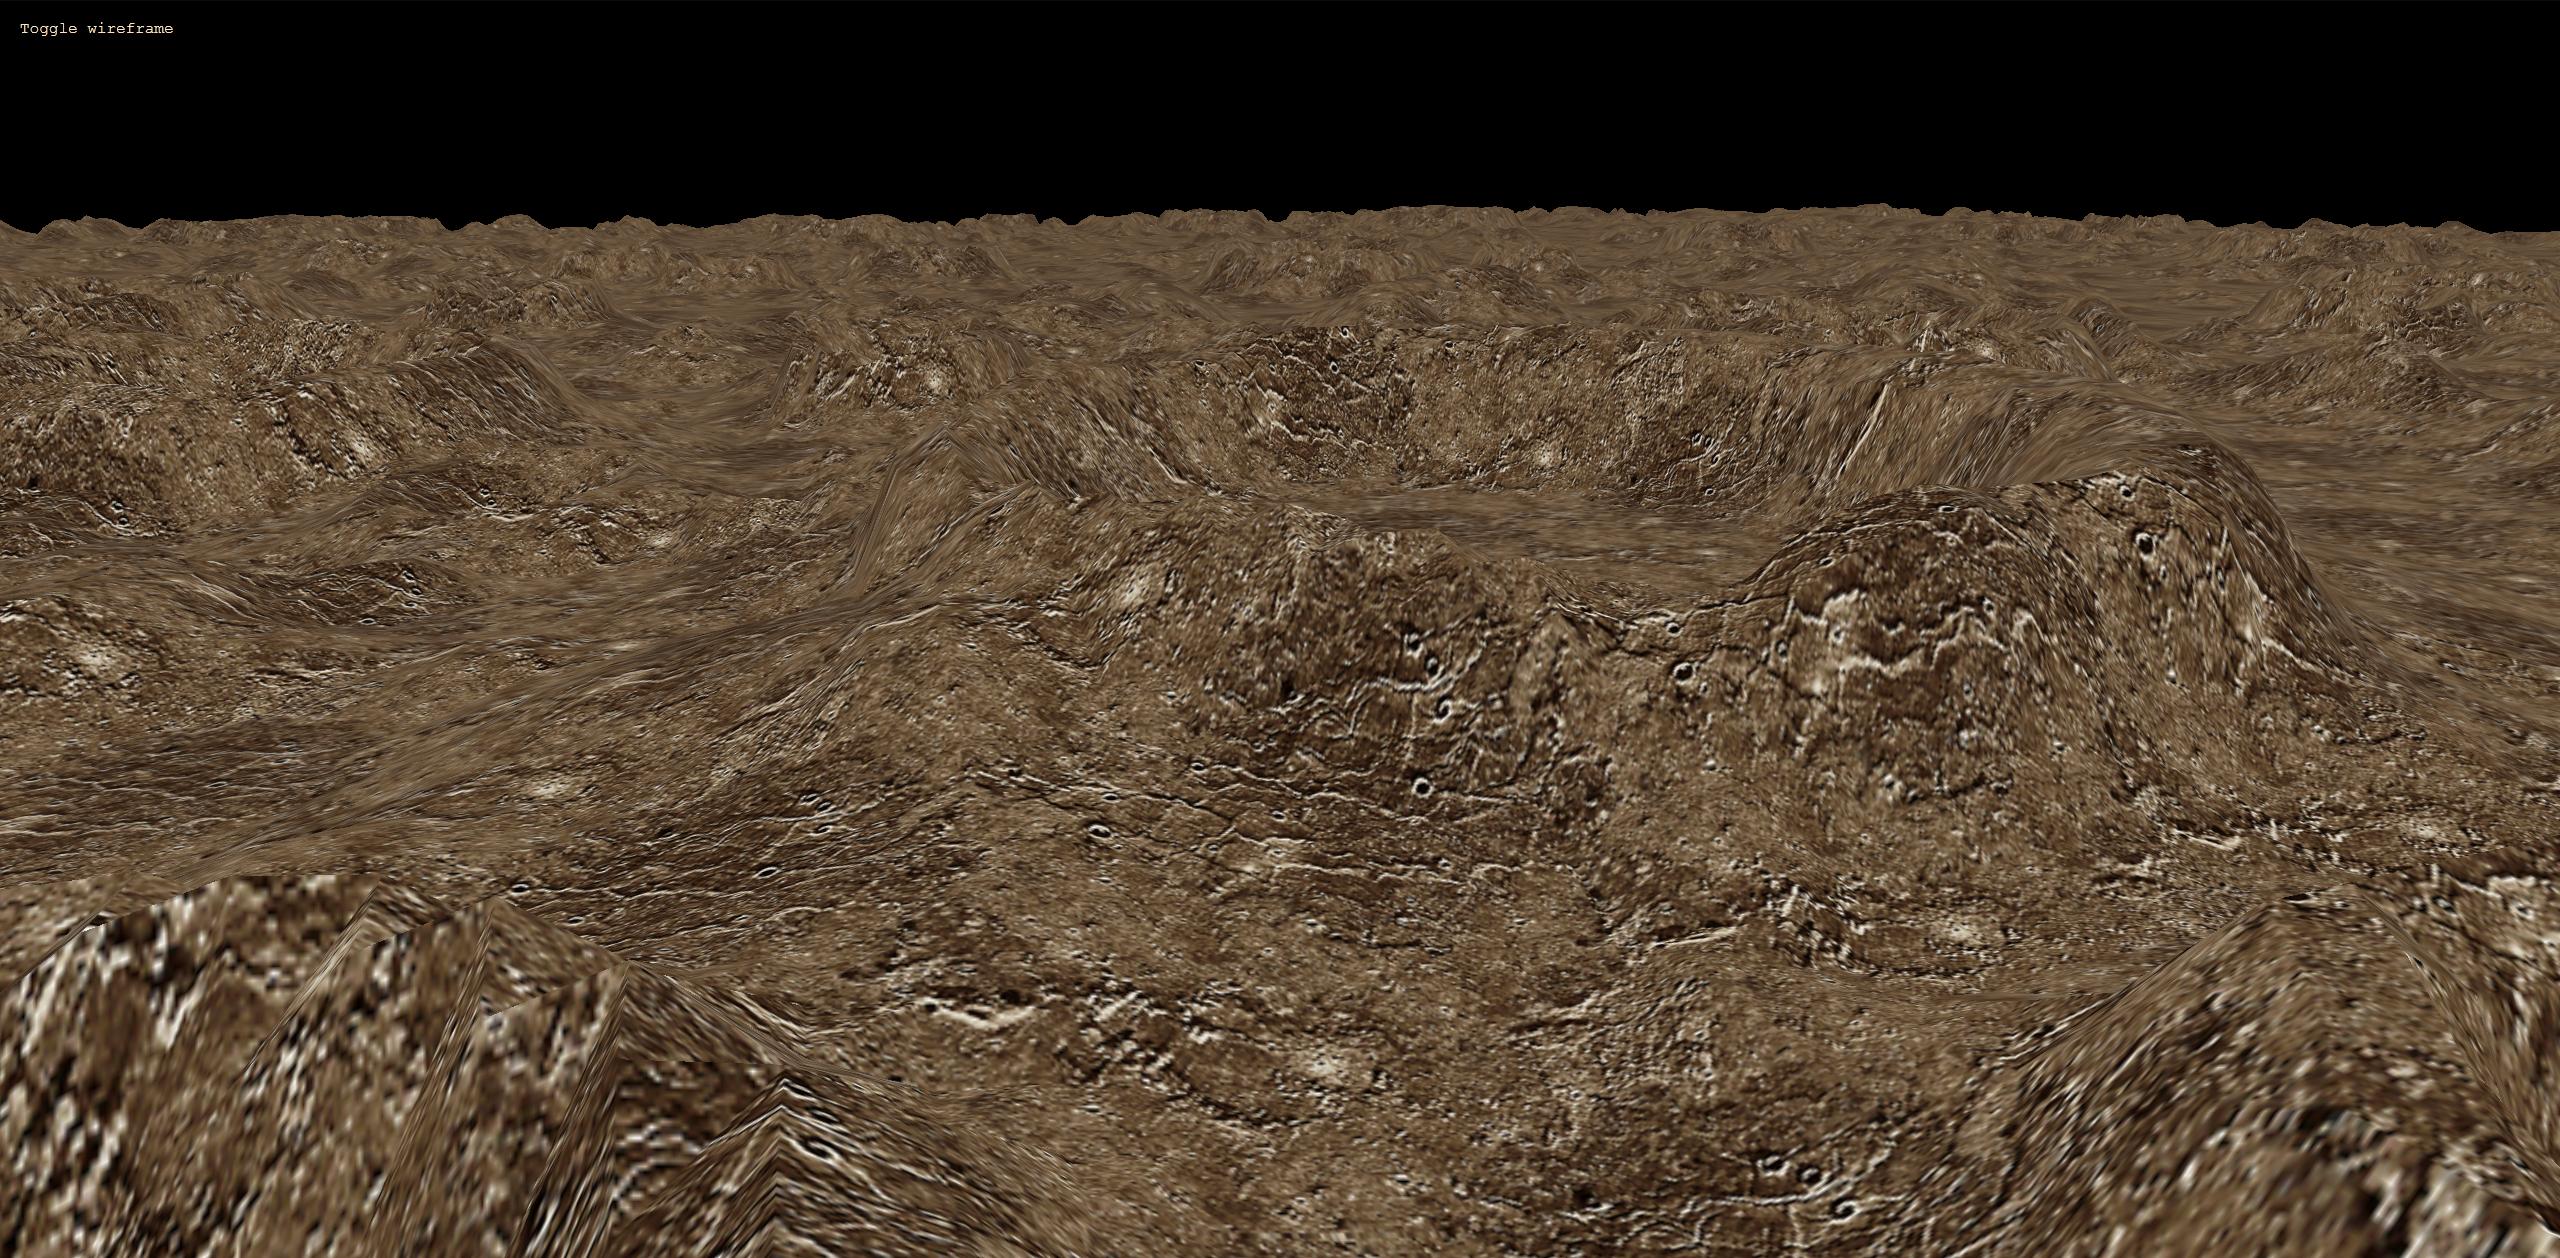 "Moon" heightmap with simple texture mapping